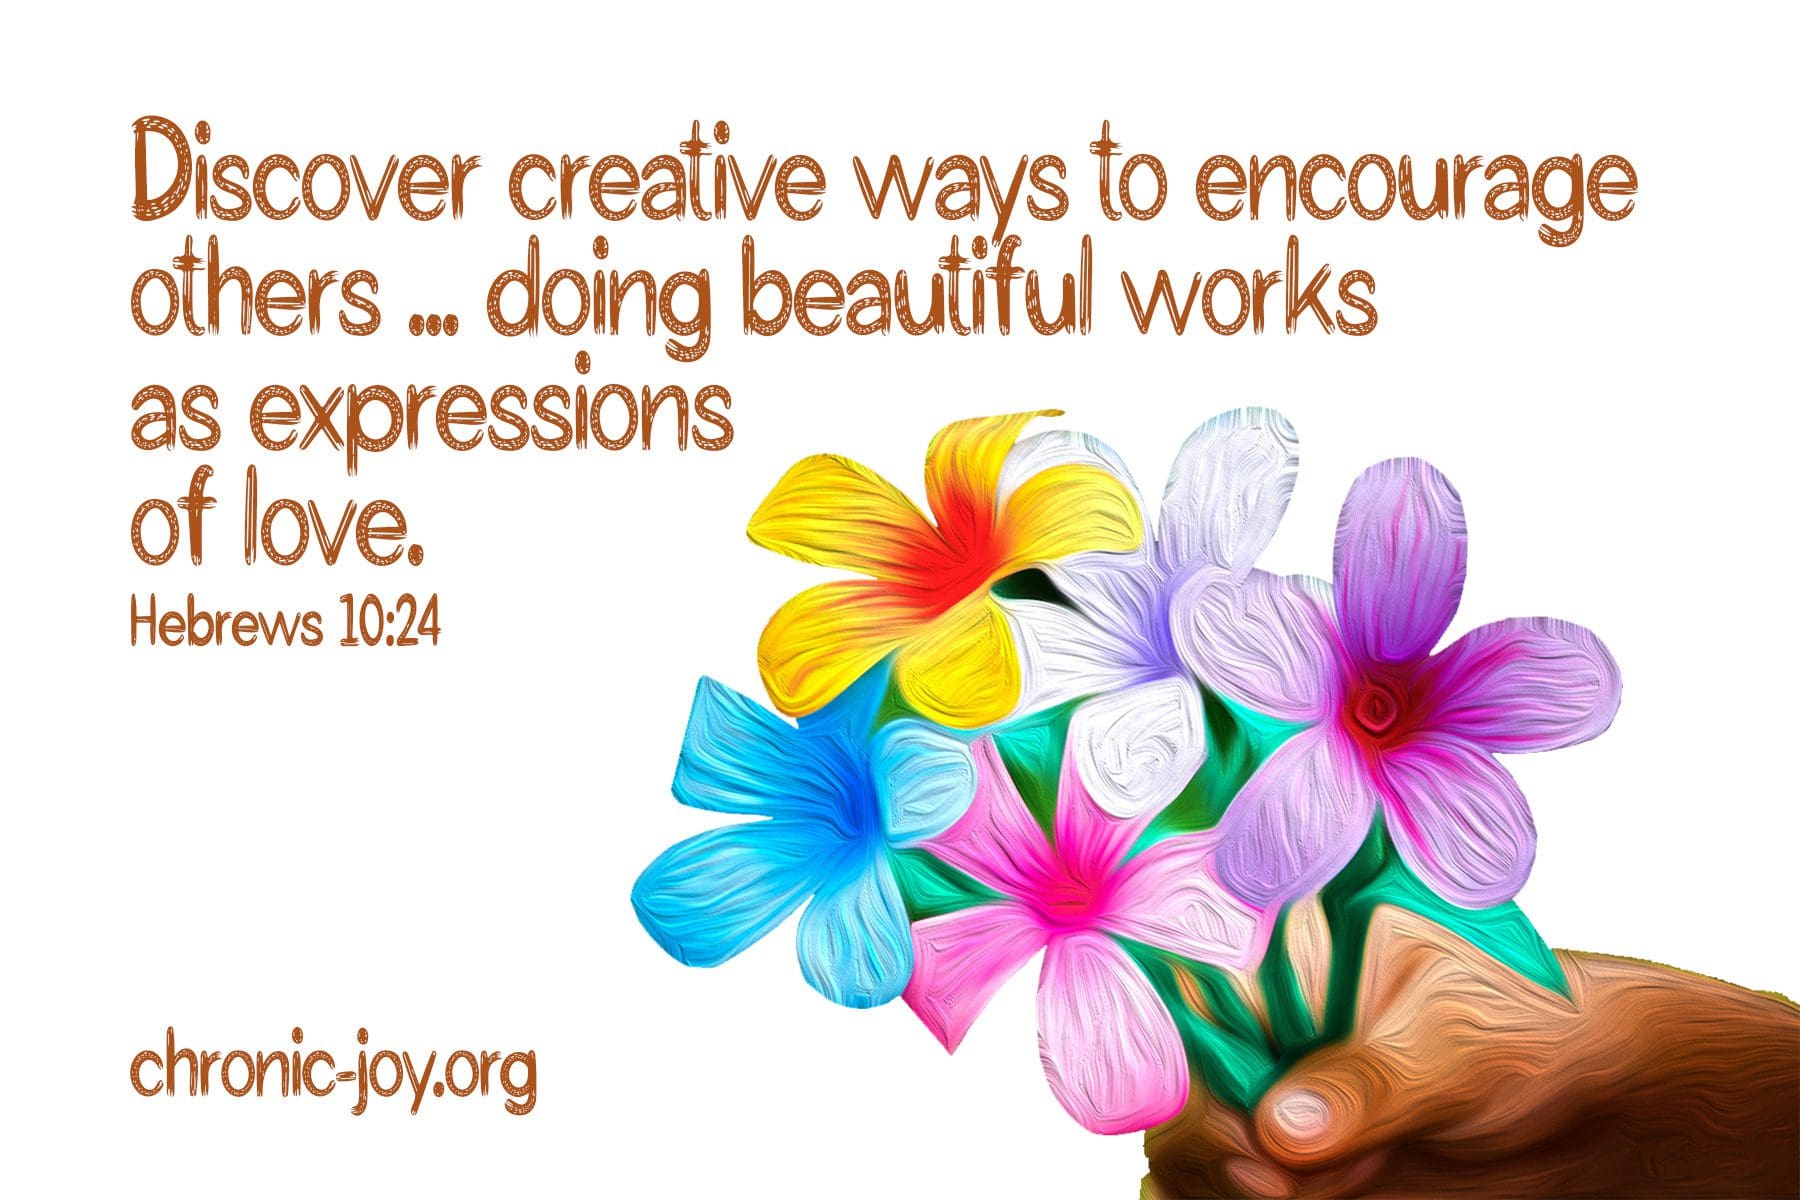 "Discover creative ways to encourage others ... doing beautiful works as expressions of love." Hebrews 10:24 TPT